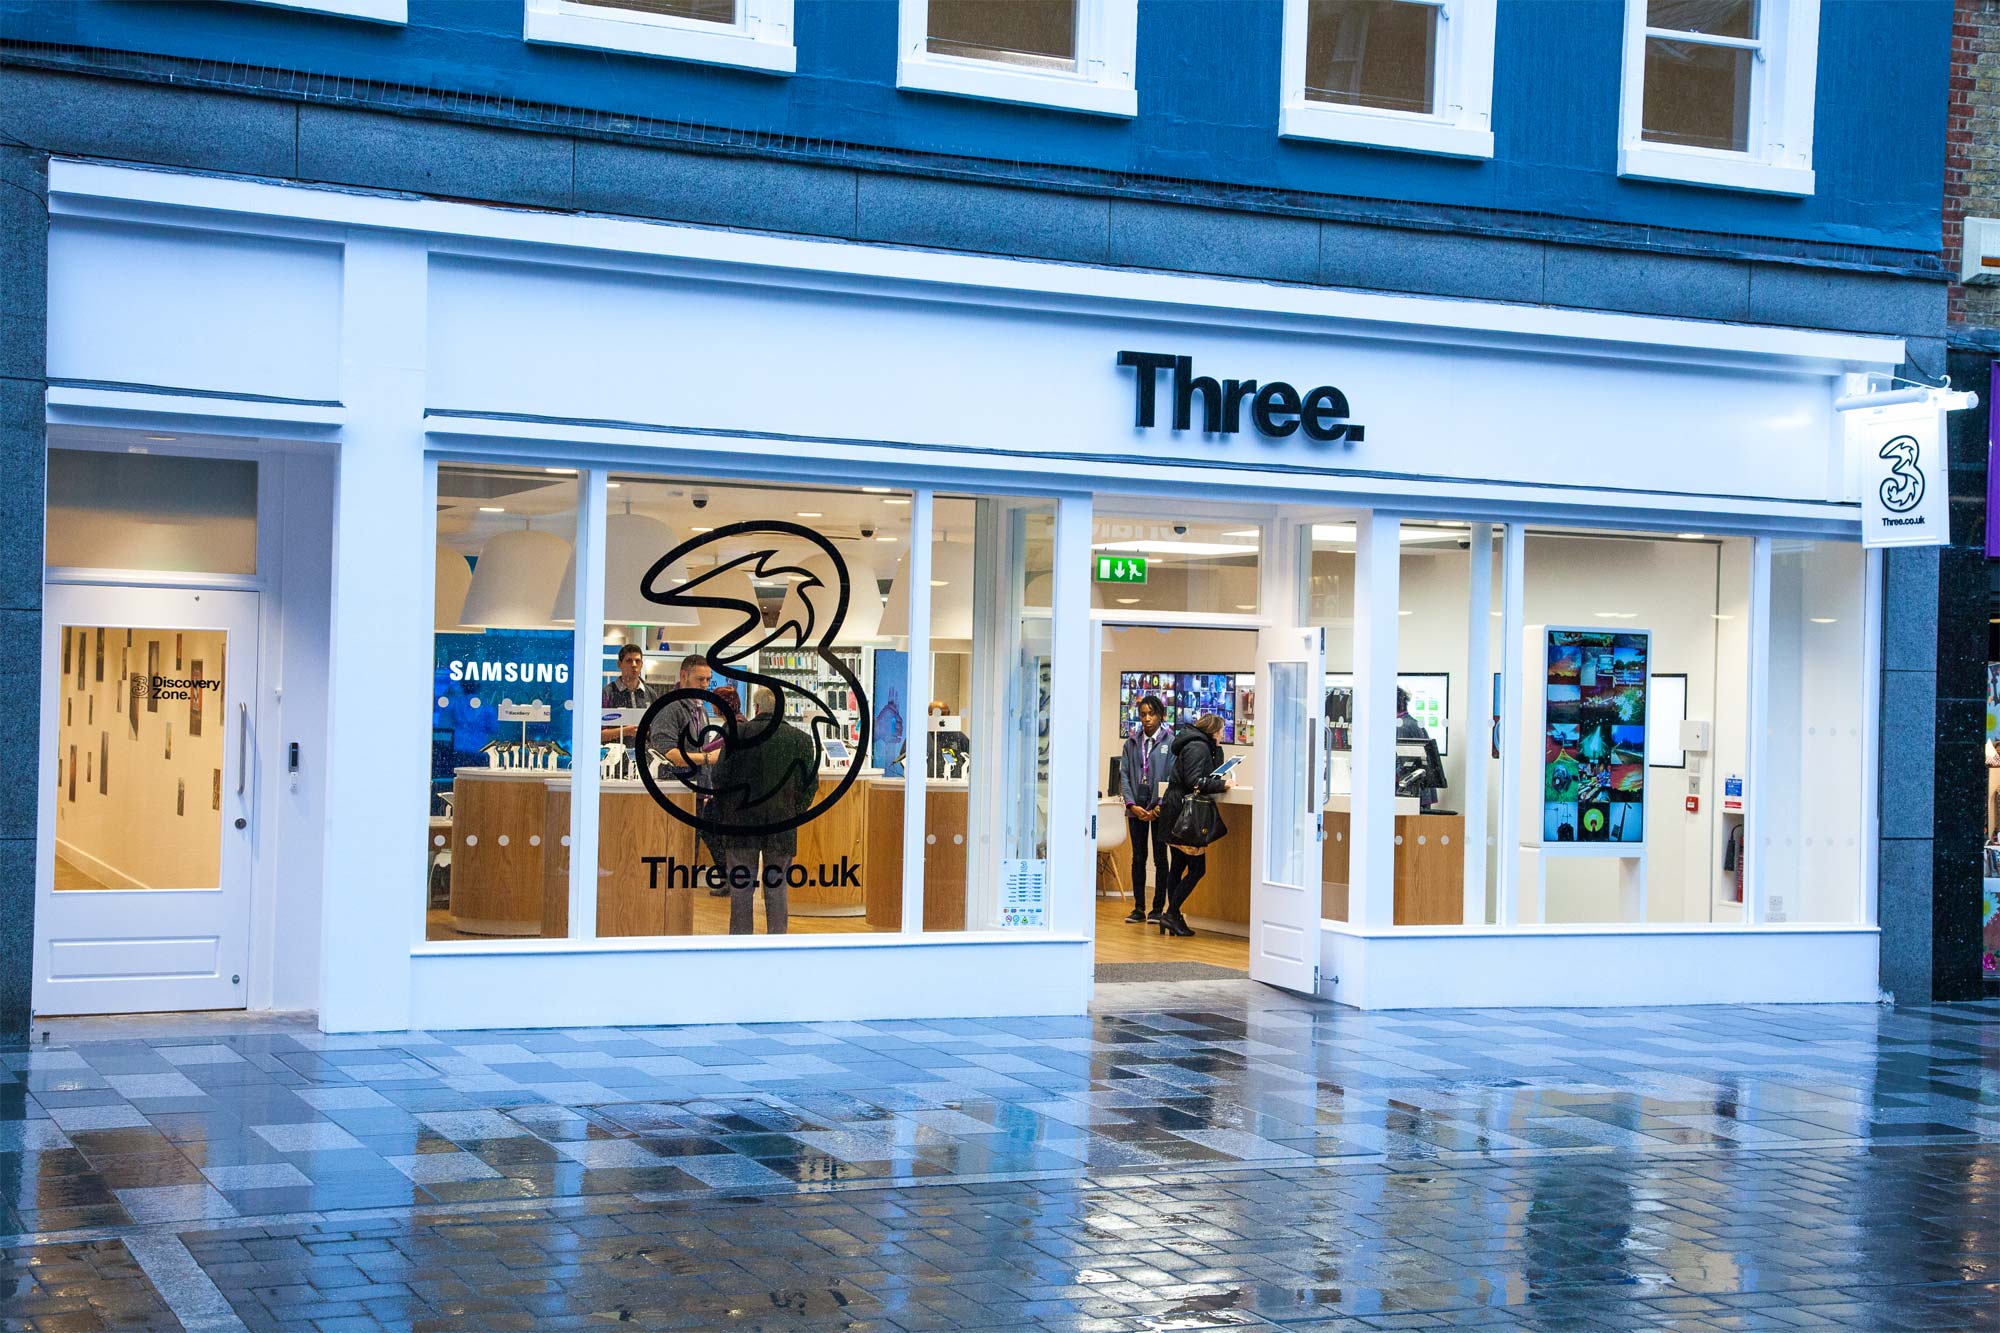 The 3 Store in Maidenhead